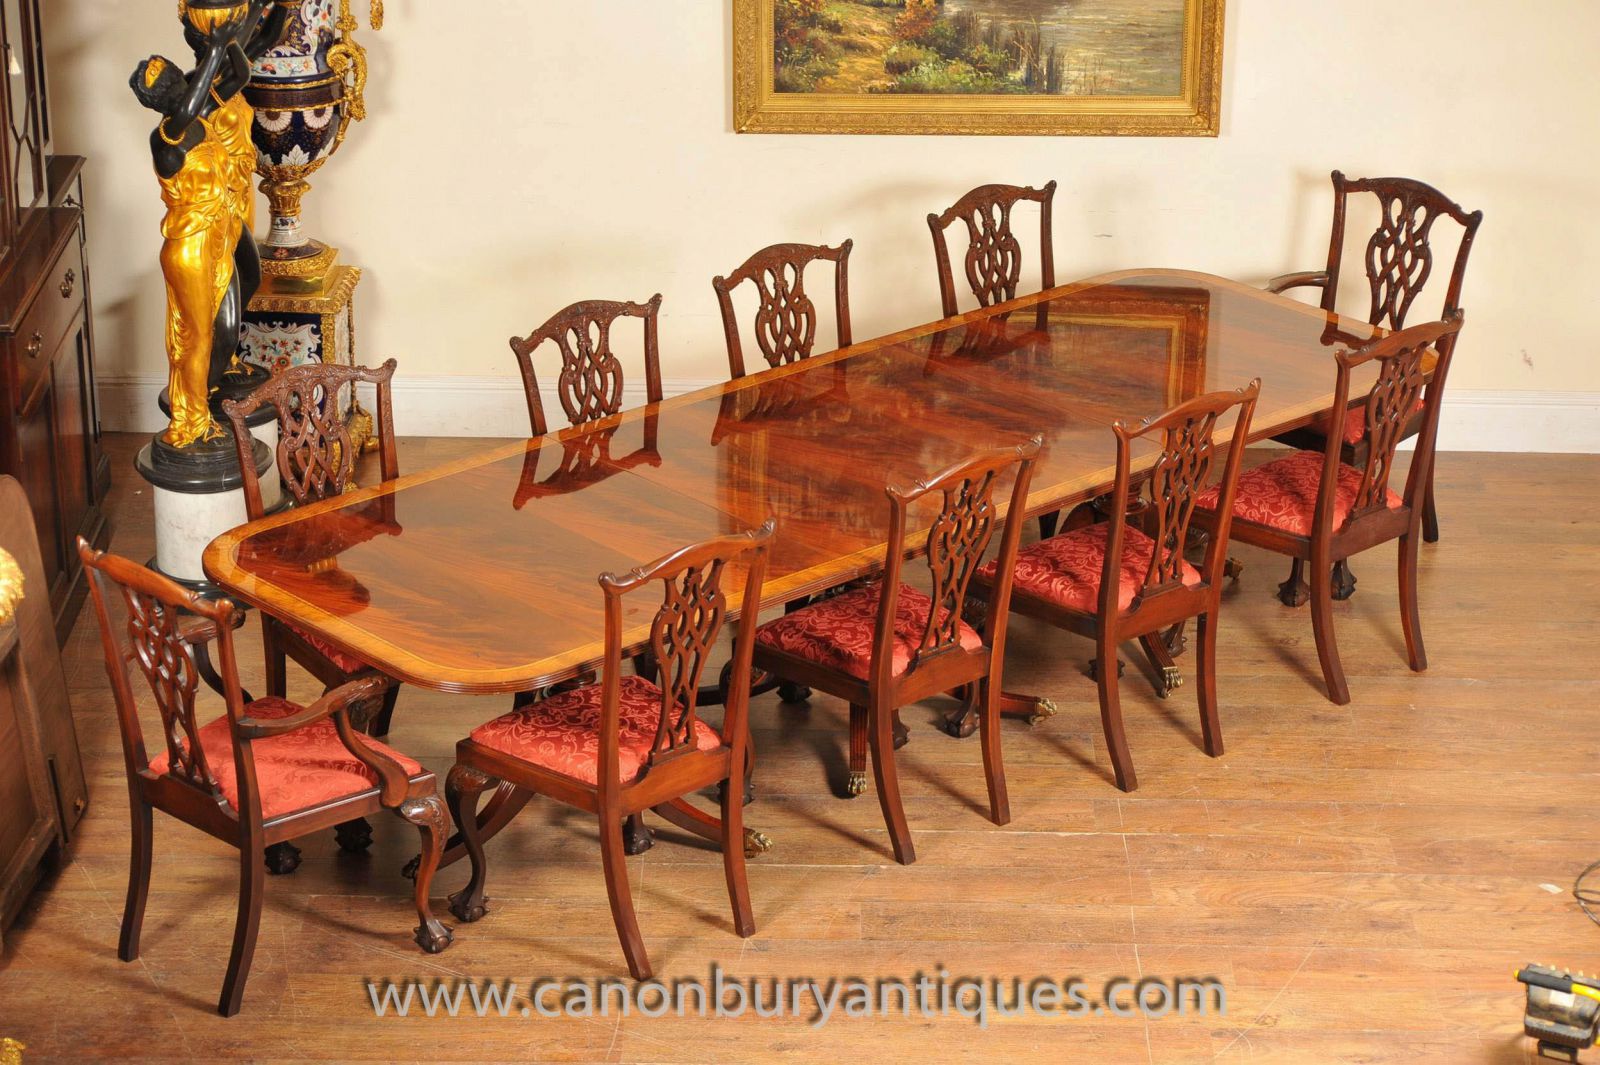 English Antique Dining Tables And Chairs A Guide